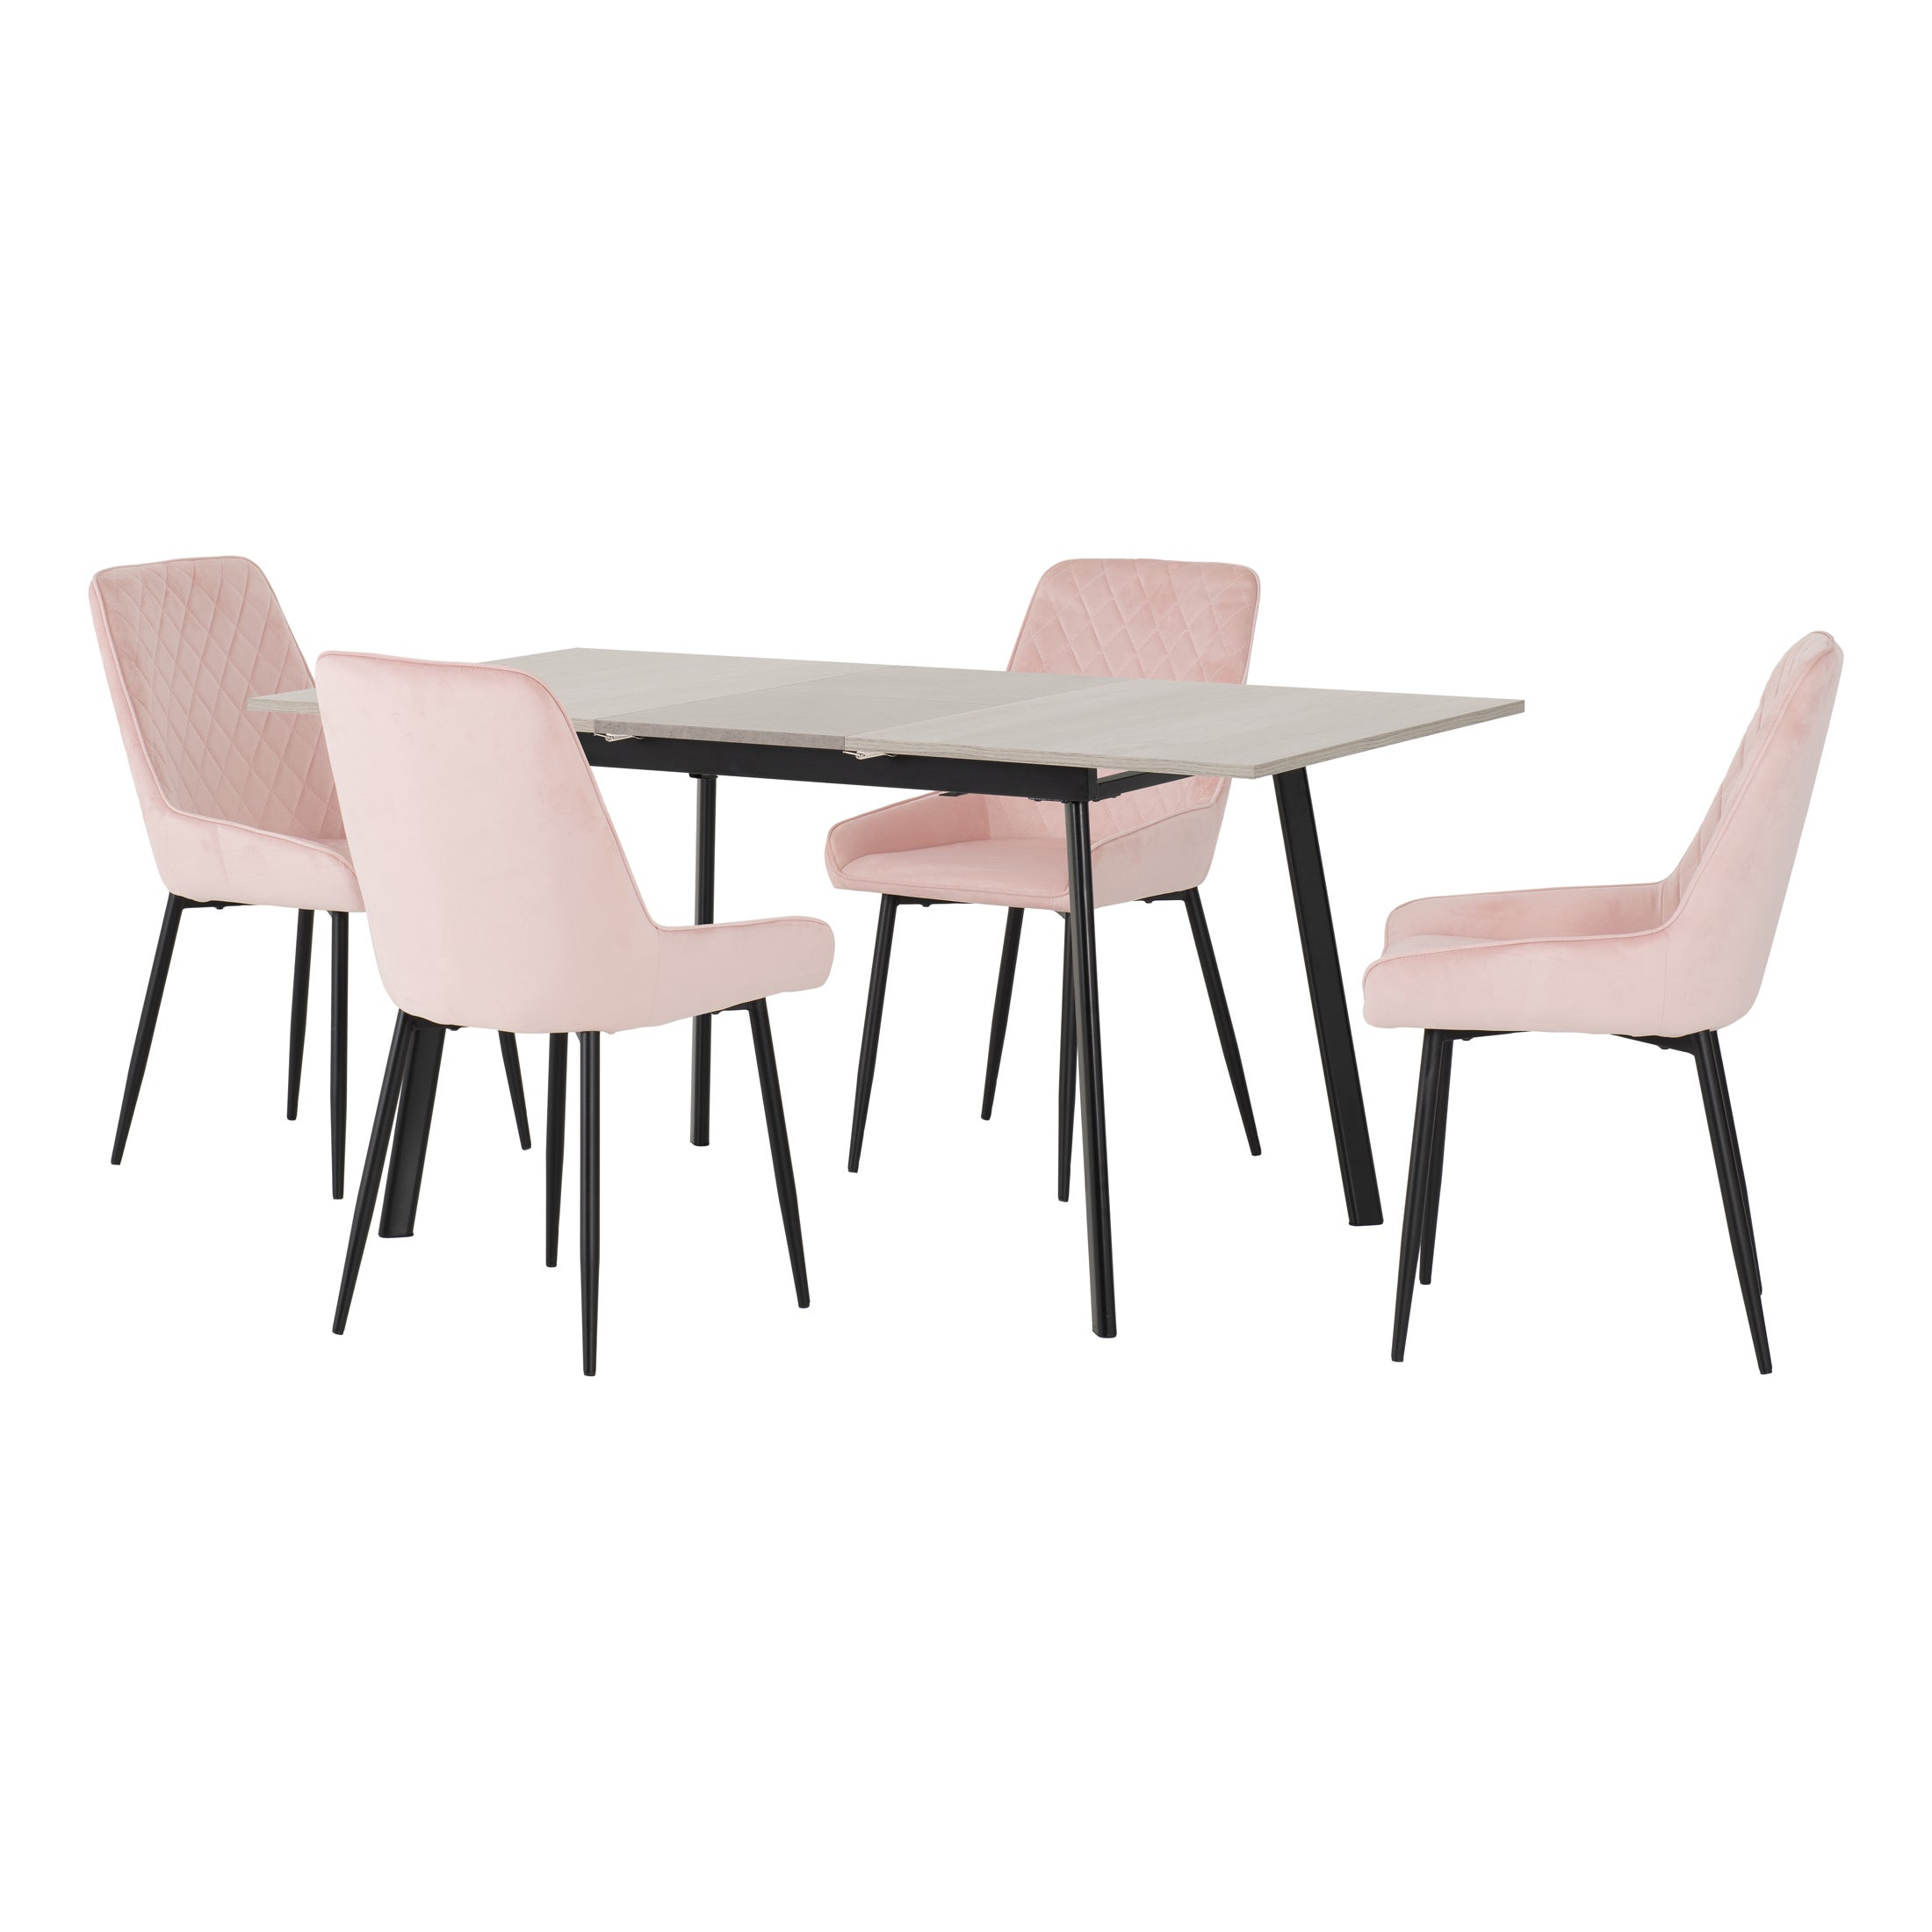 Avery Rectangular Extendable Dining Table With 4 Chairs Pink